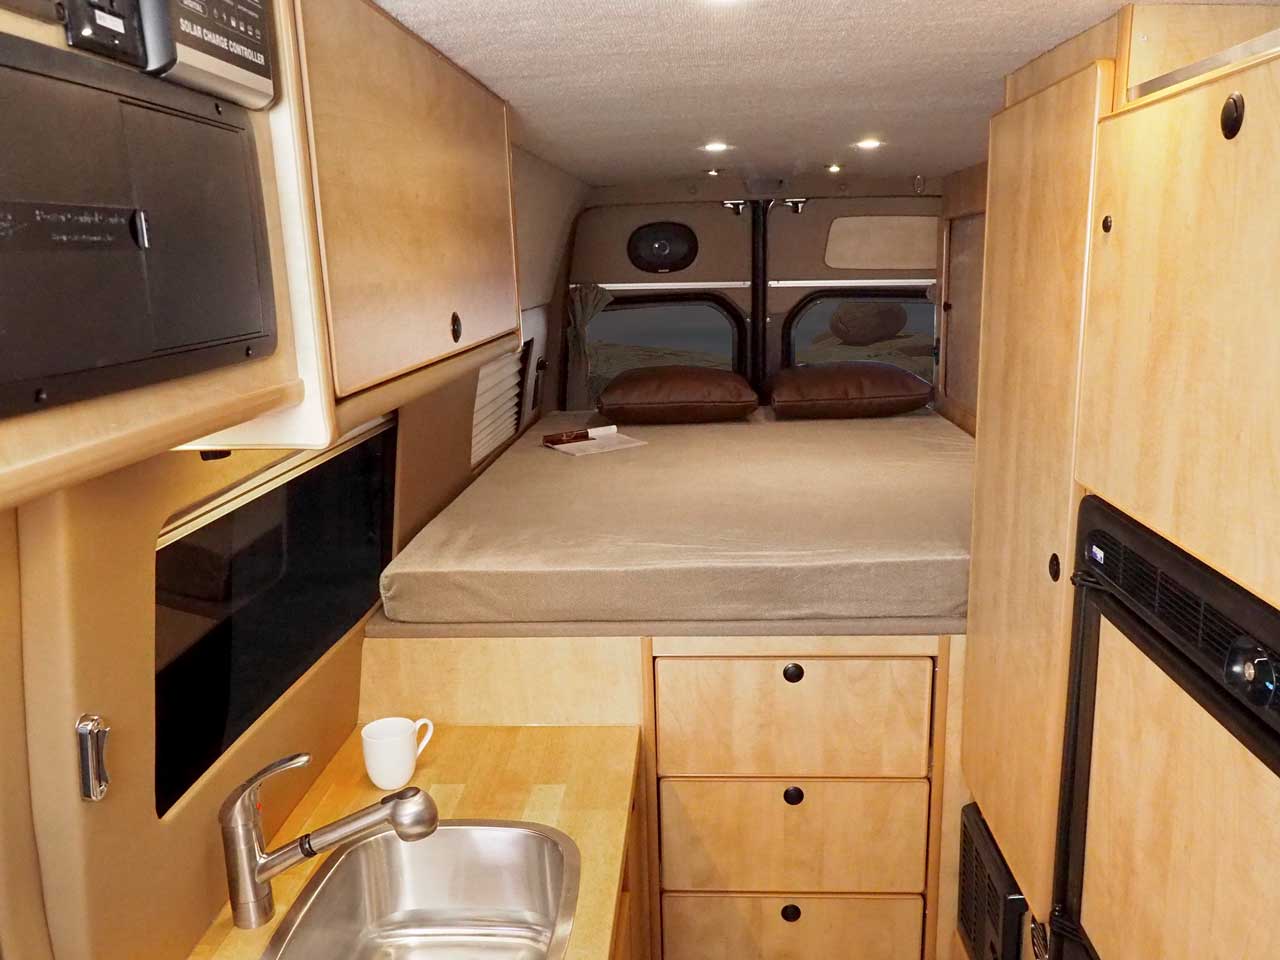 Sprinter interior with maple cabinets and platform bed.